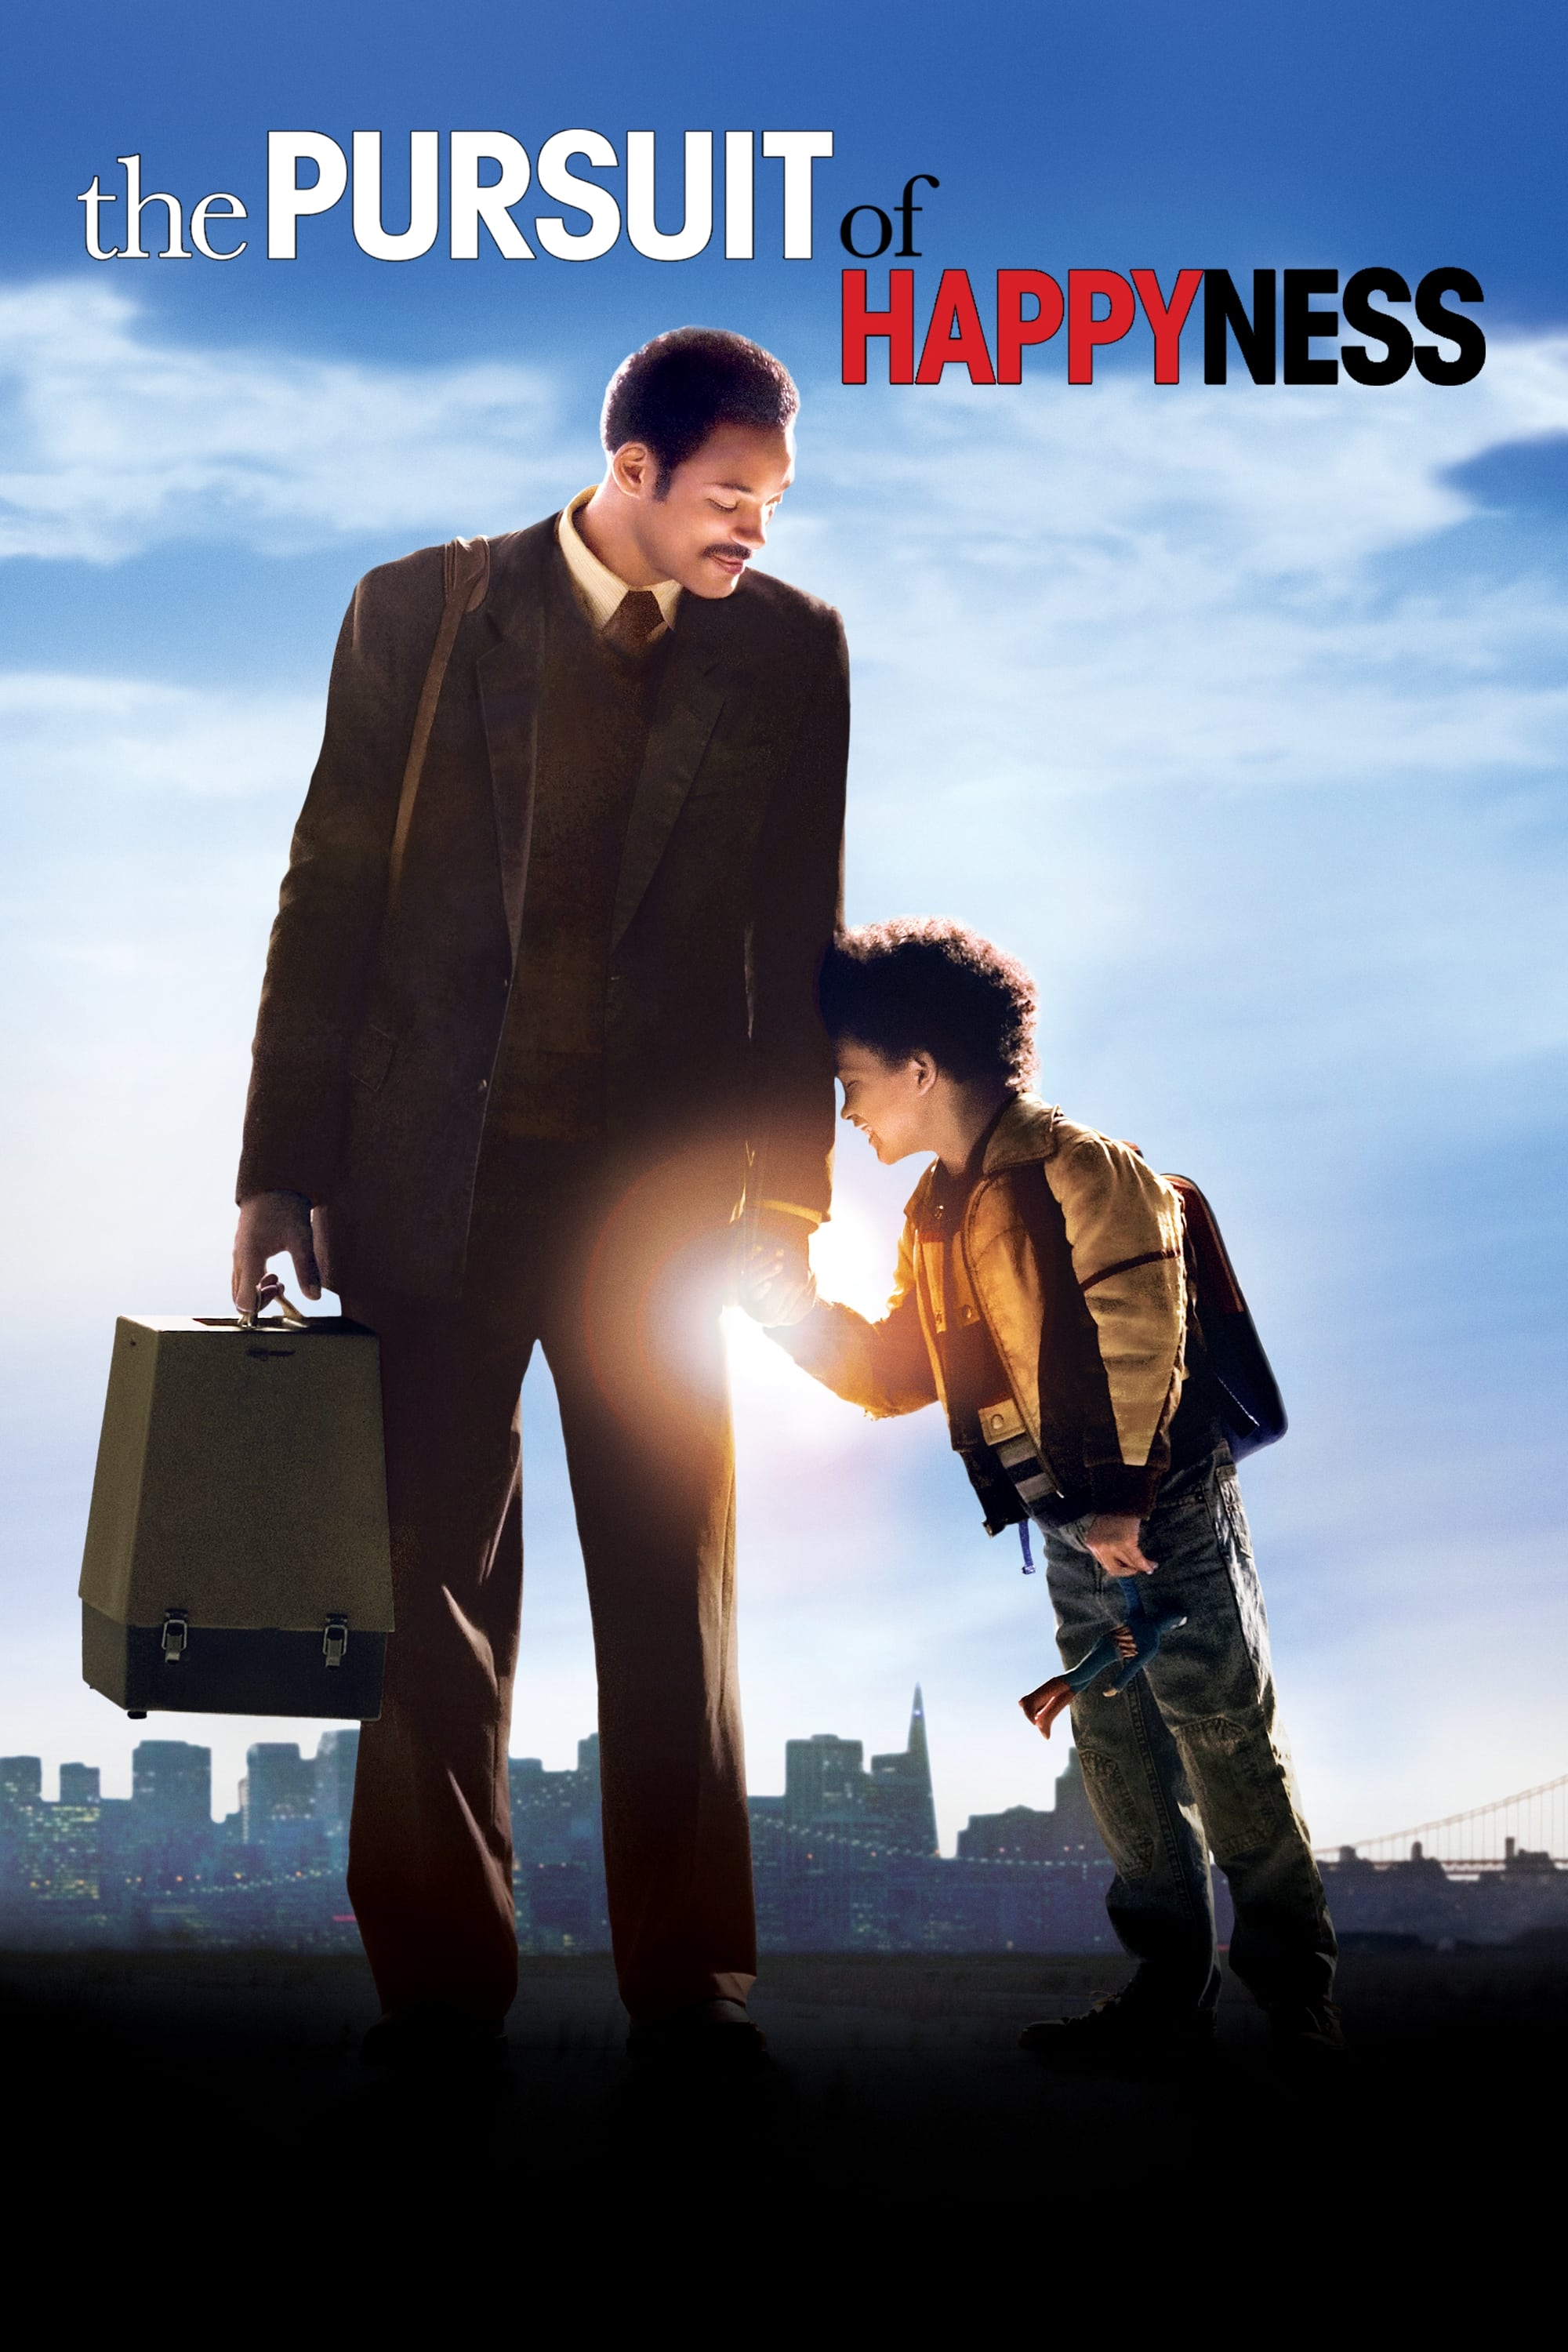 The Pursuit of Happyness image